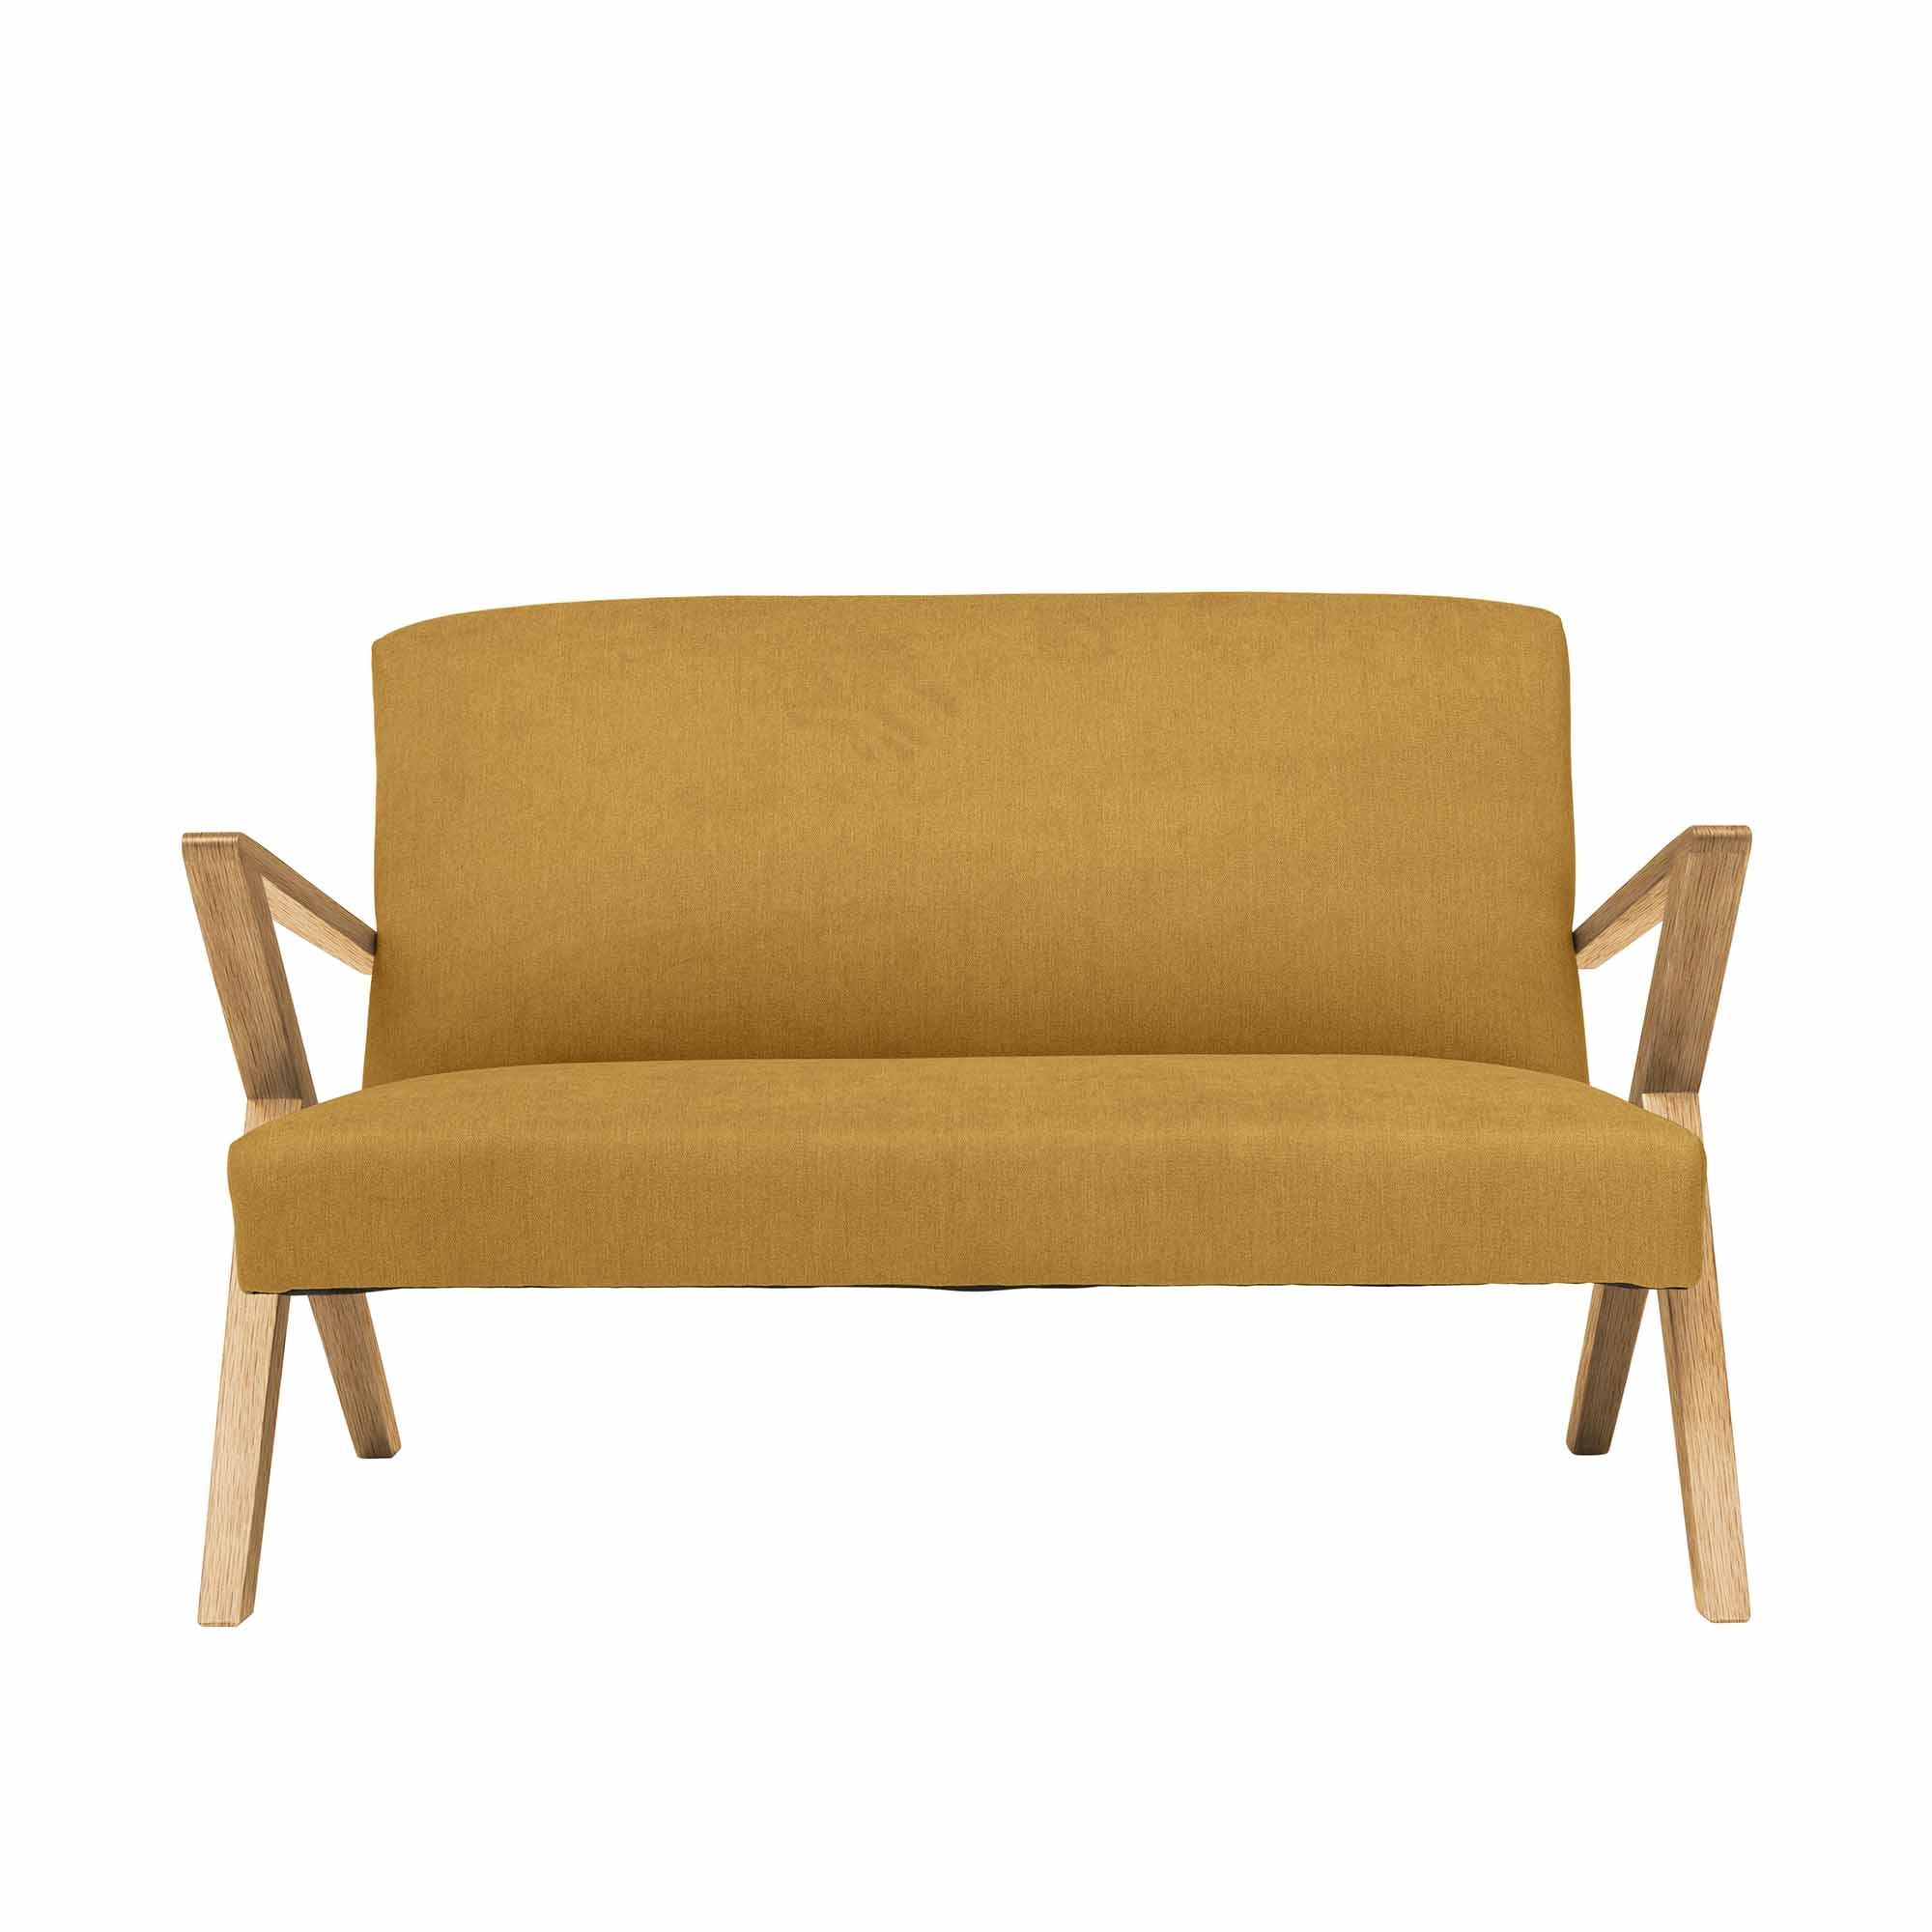  2-Seater Sofa, Oak Wood Frame, Natural Colour yellow fabric, front view